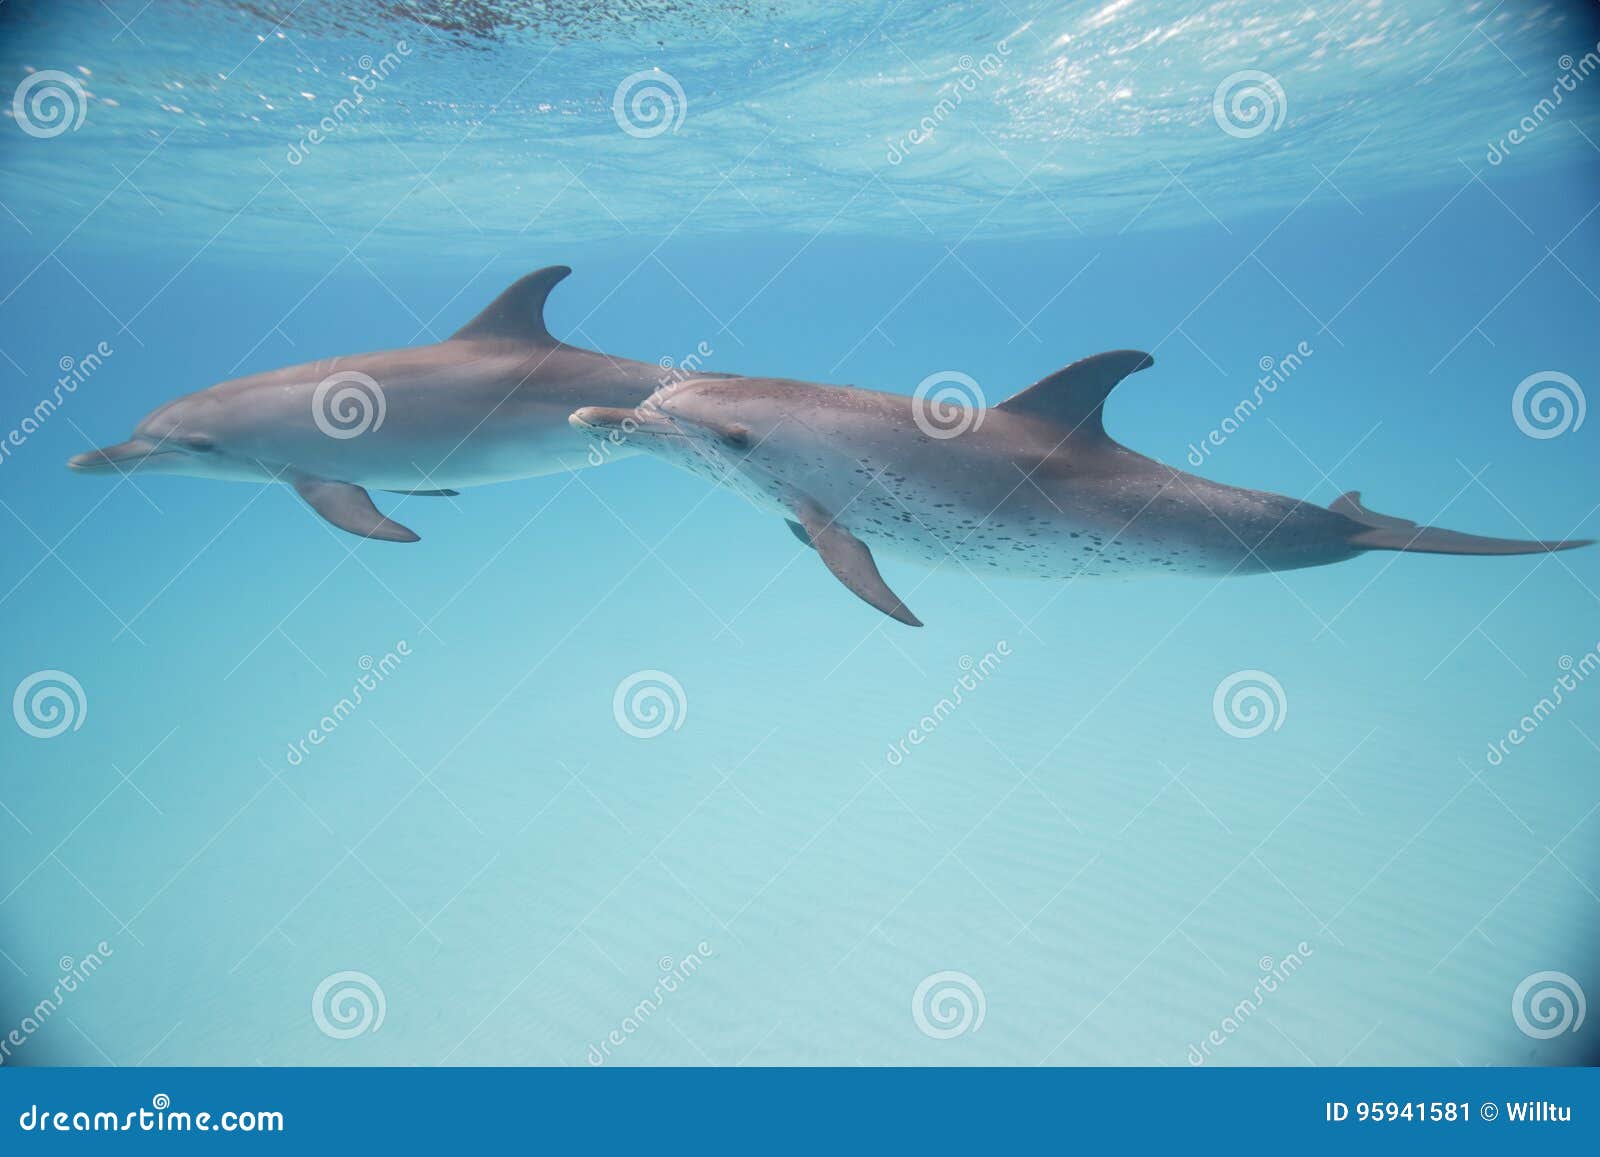 bottle-nose dolphins swimming just below the ocean surface